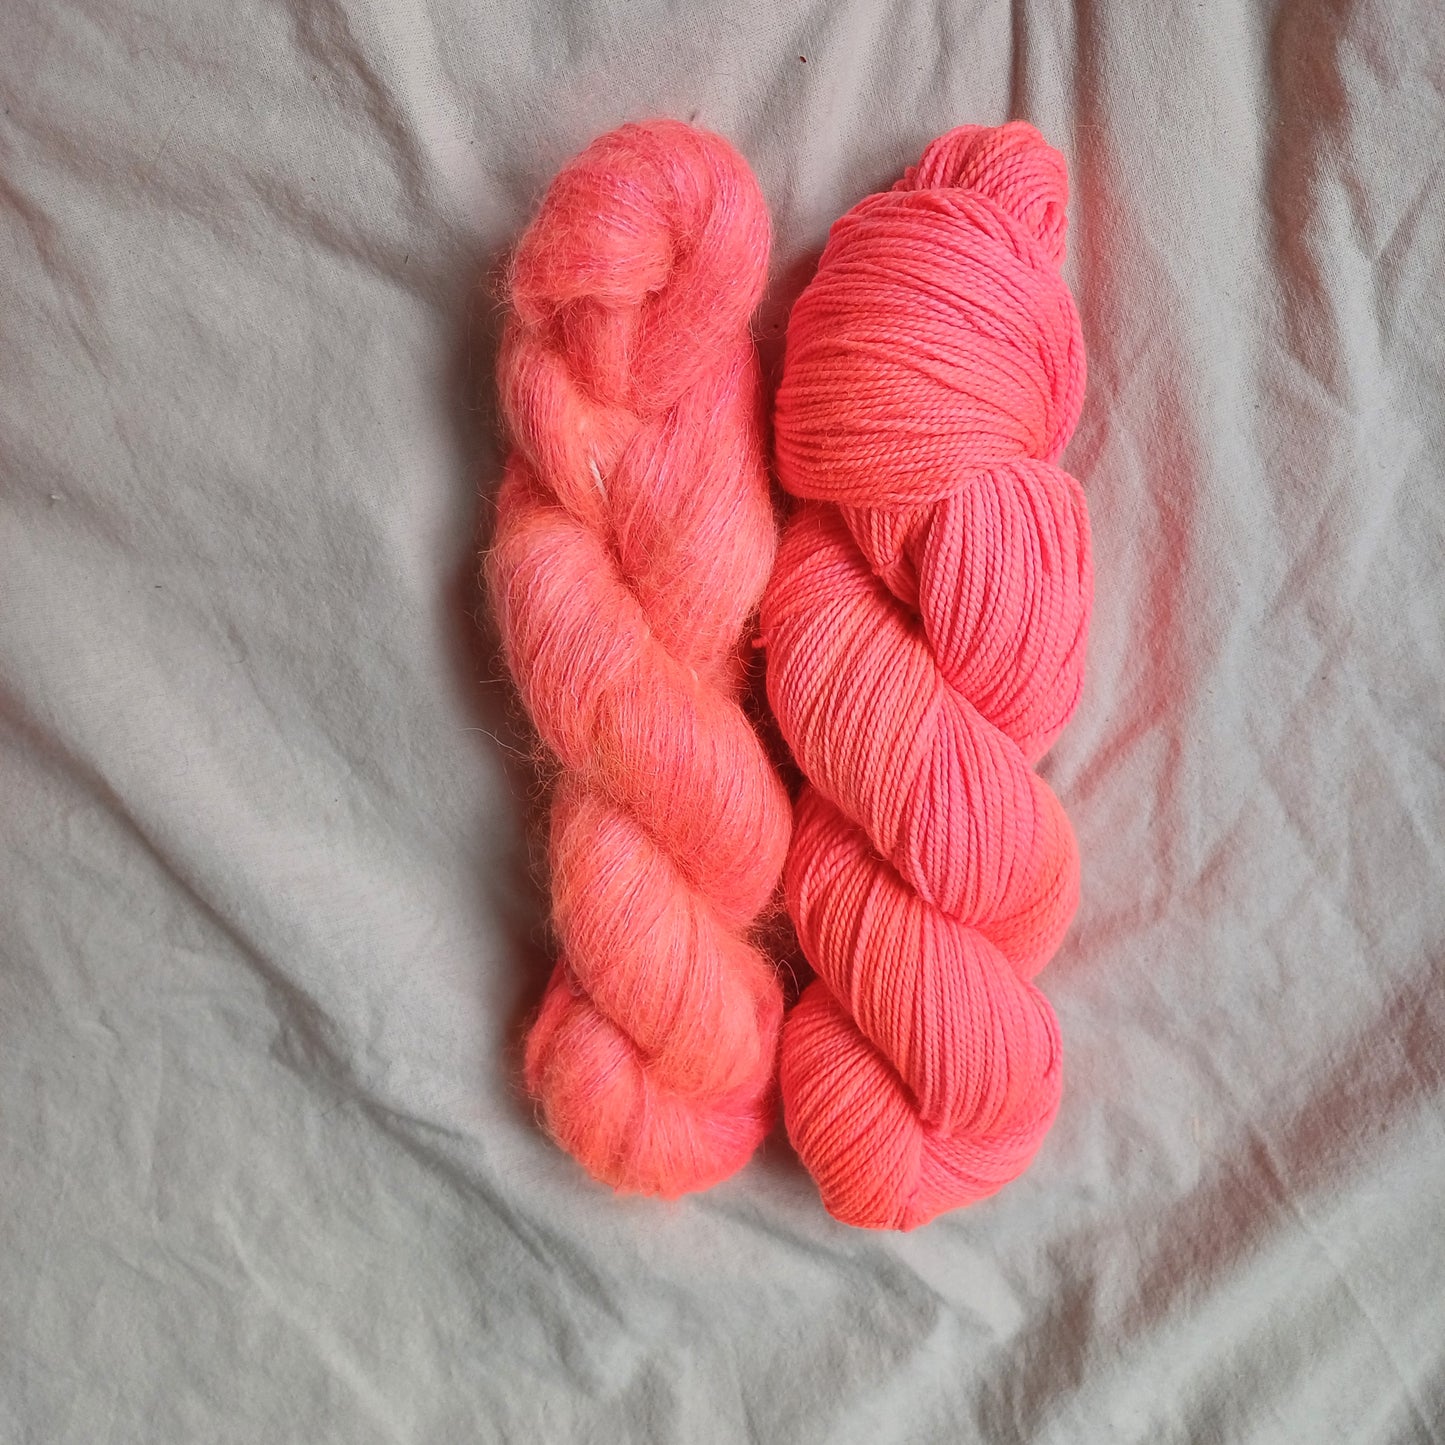 The Neon Edit "Vibrant Red" in Frog Mouse Twisty Sock